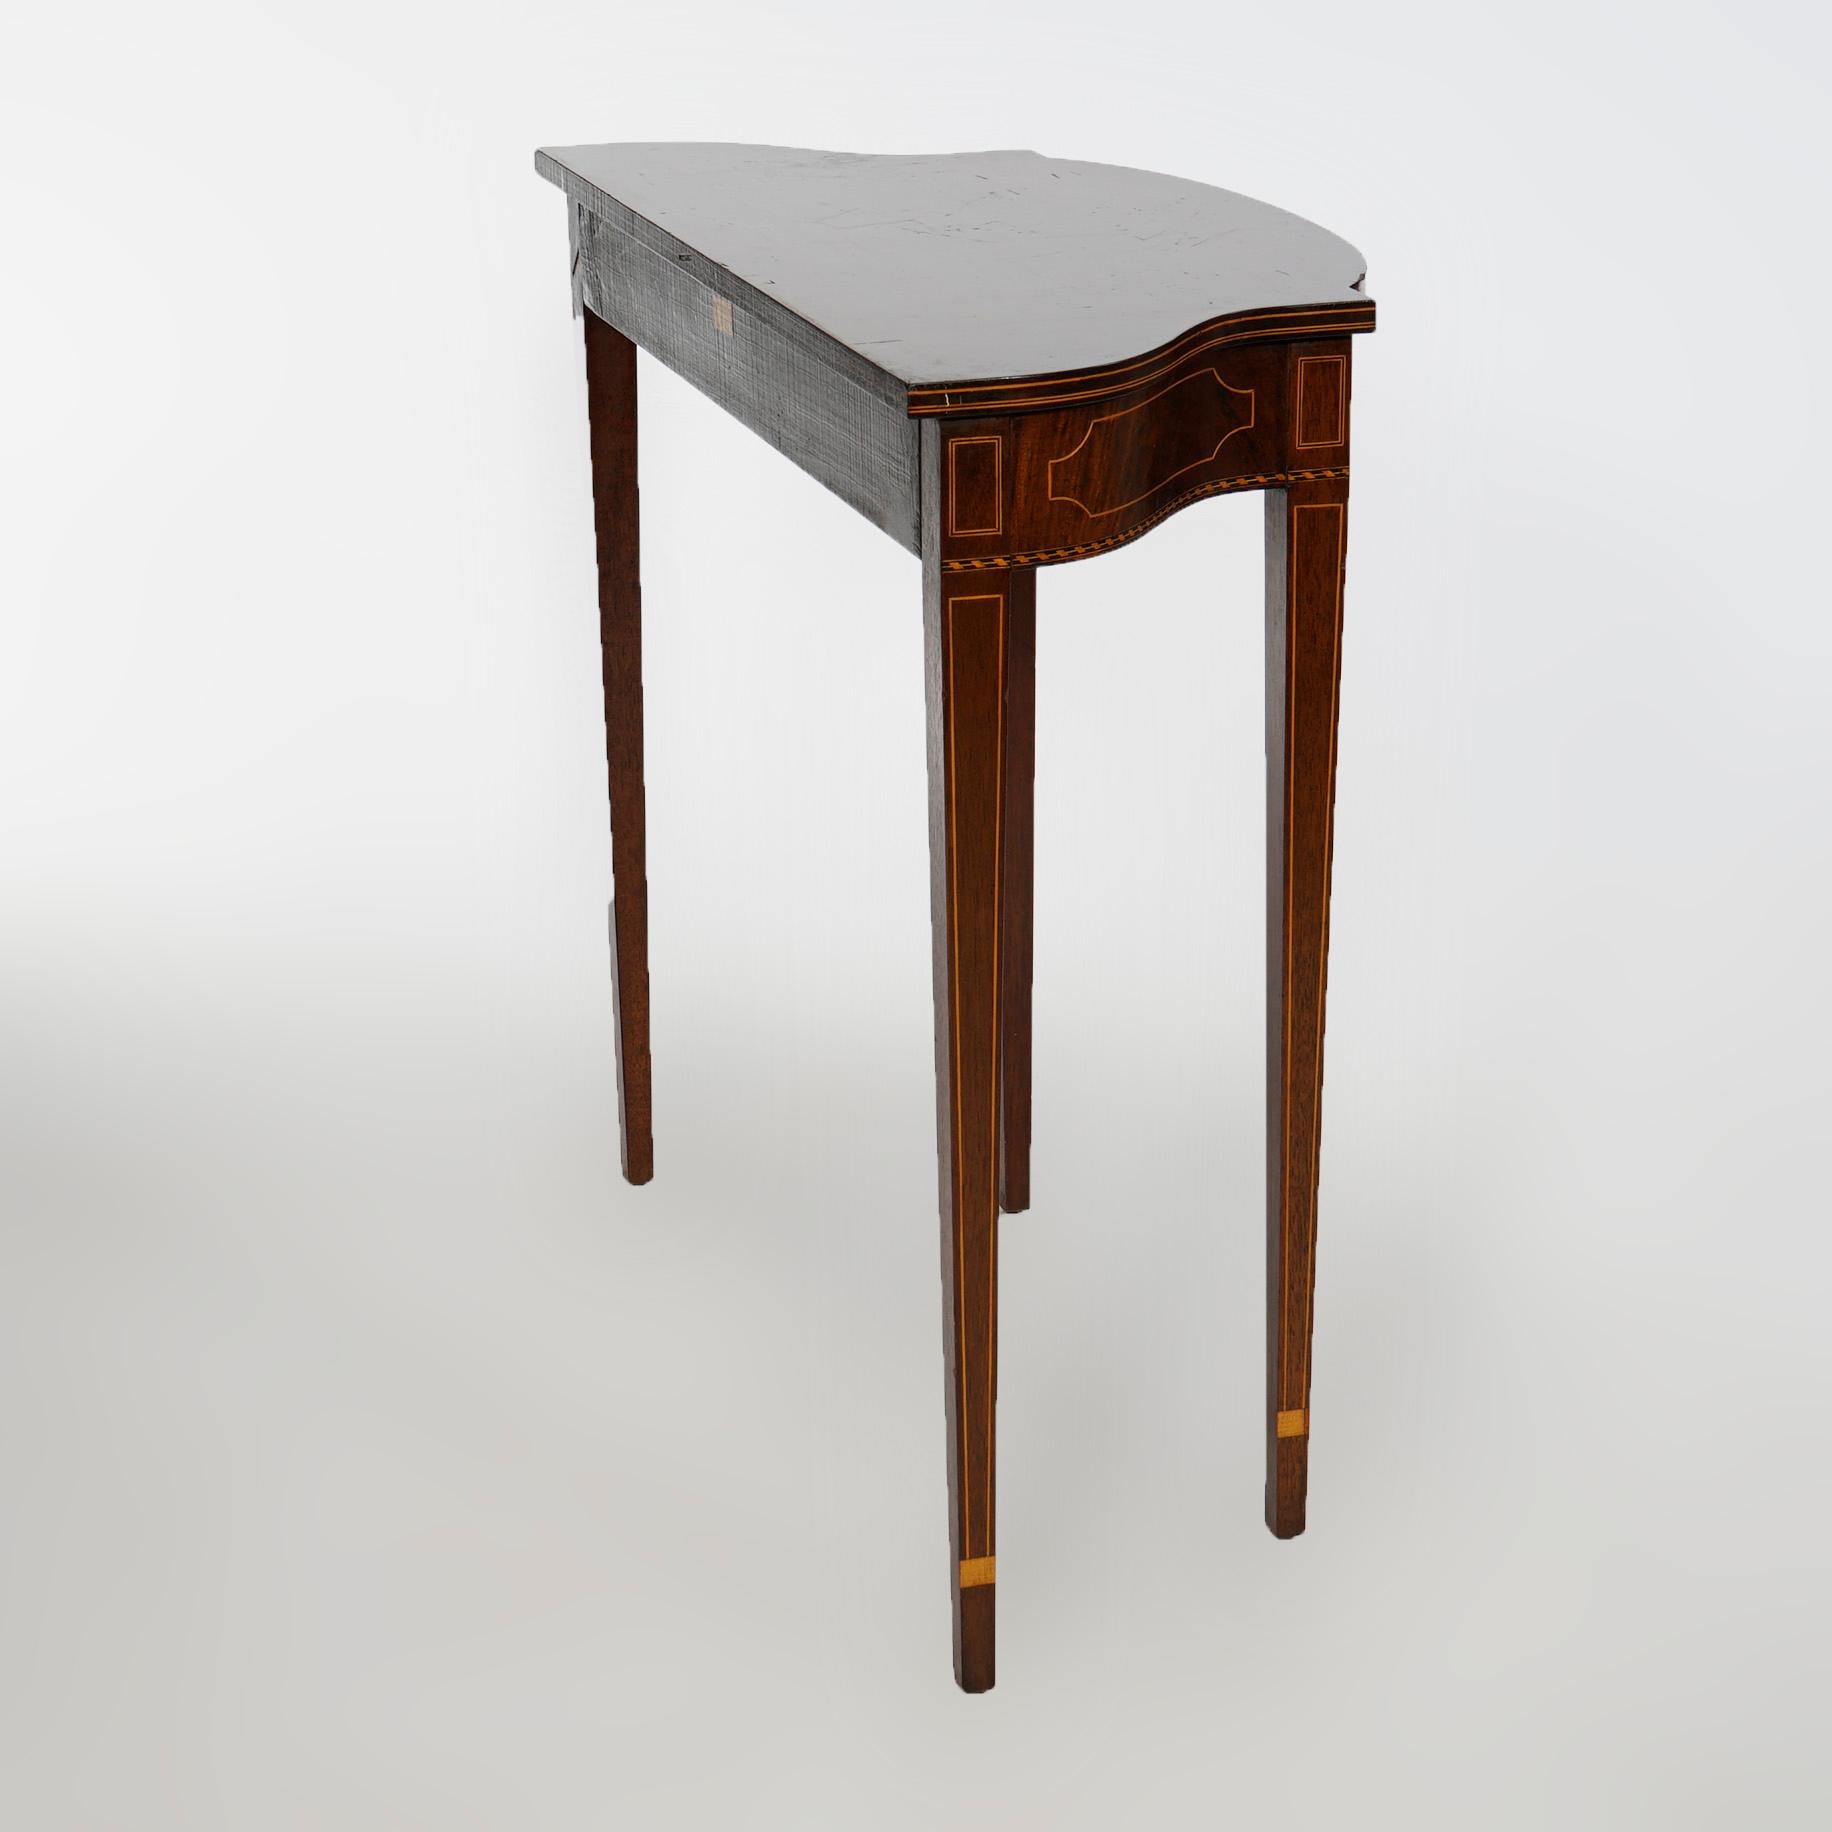 Inlay Antique Potthast Bros. Flame Satinwood Inlaid Flame Mahogany Side Table c1920